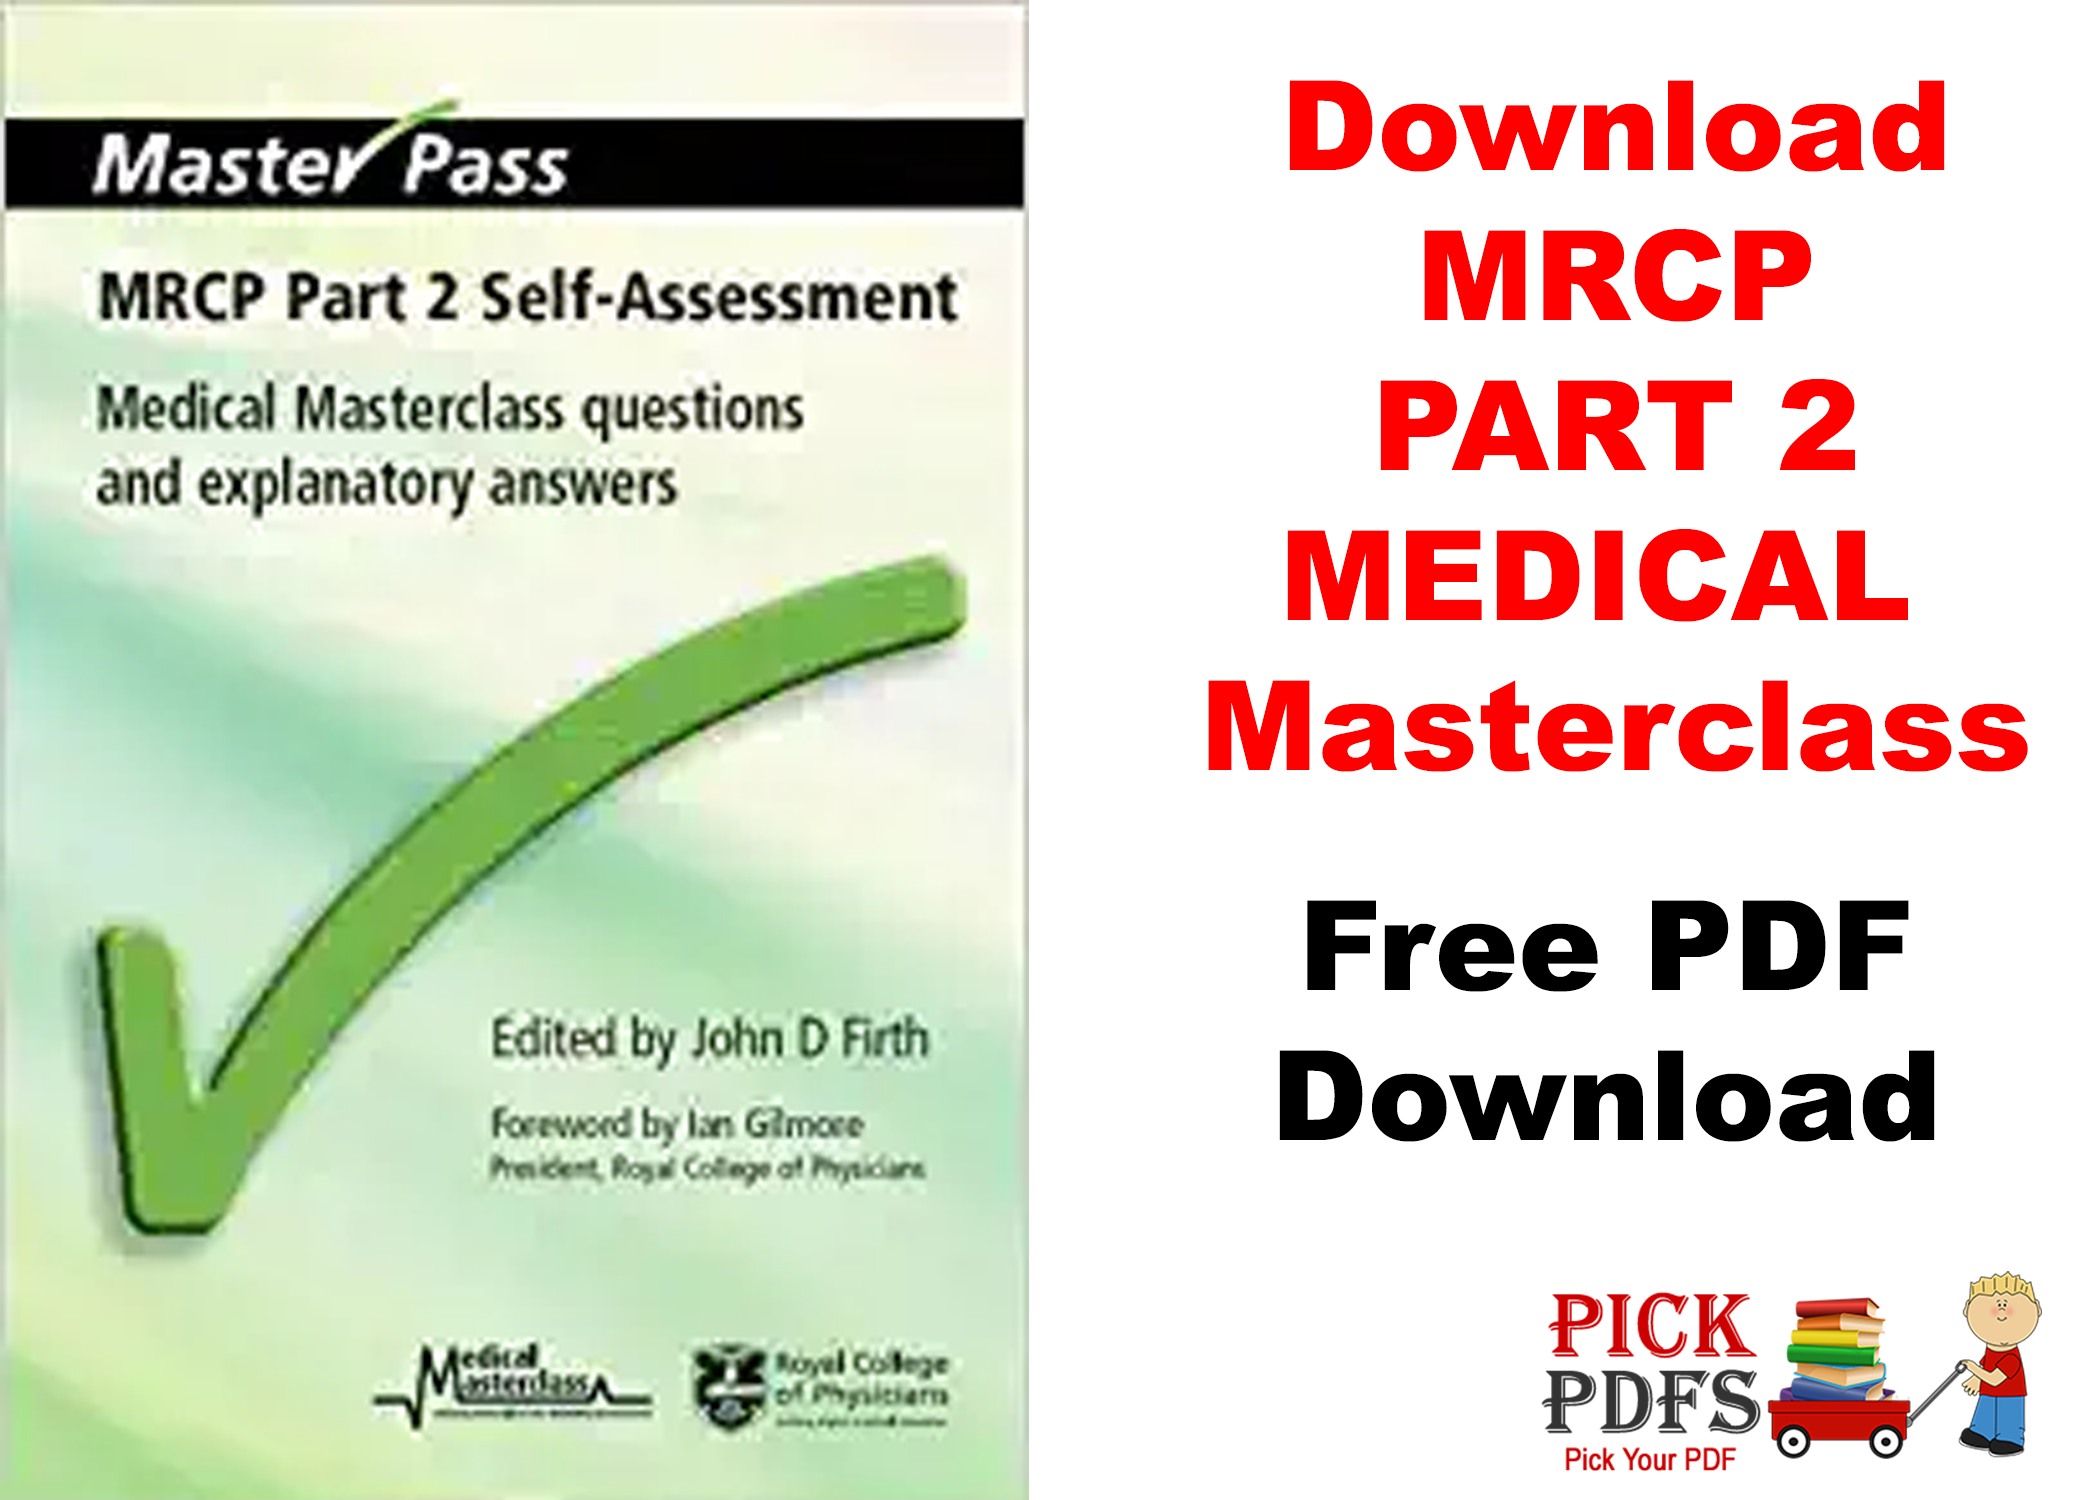 https://pickpdfs.com/download-mrcp-paces-manual-pdf-free-direct-links/